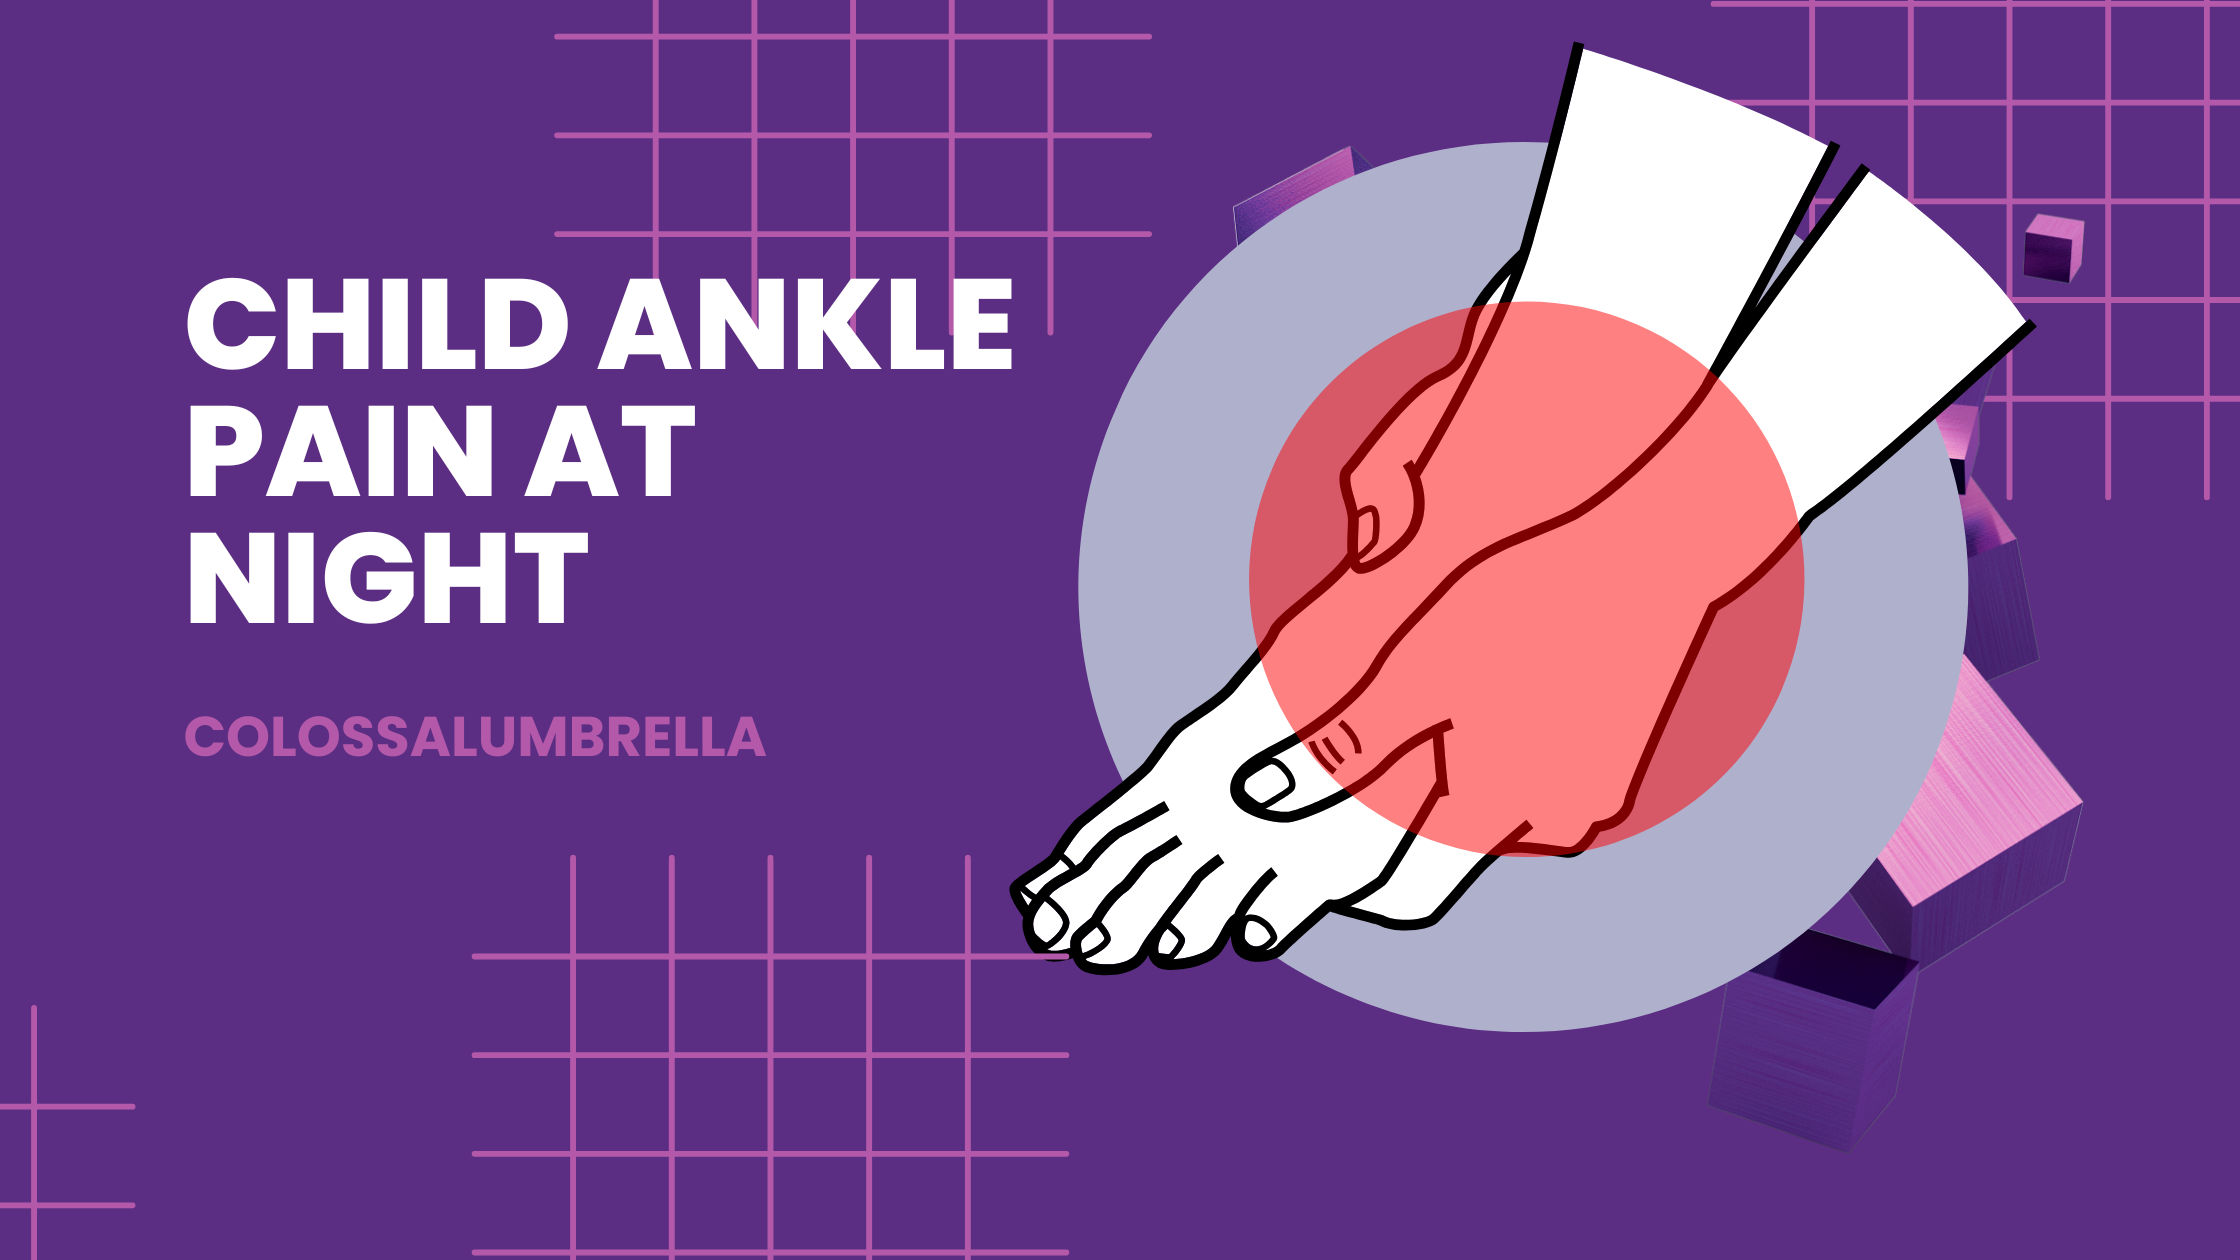 How to Alleviate Child ankle pain at night- 7 Effective Tips for Parents